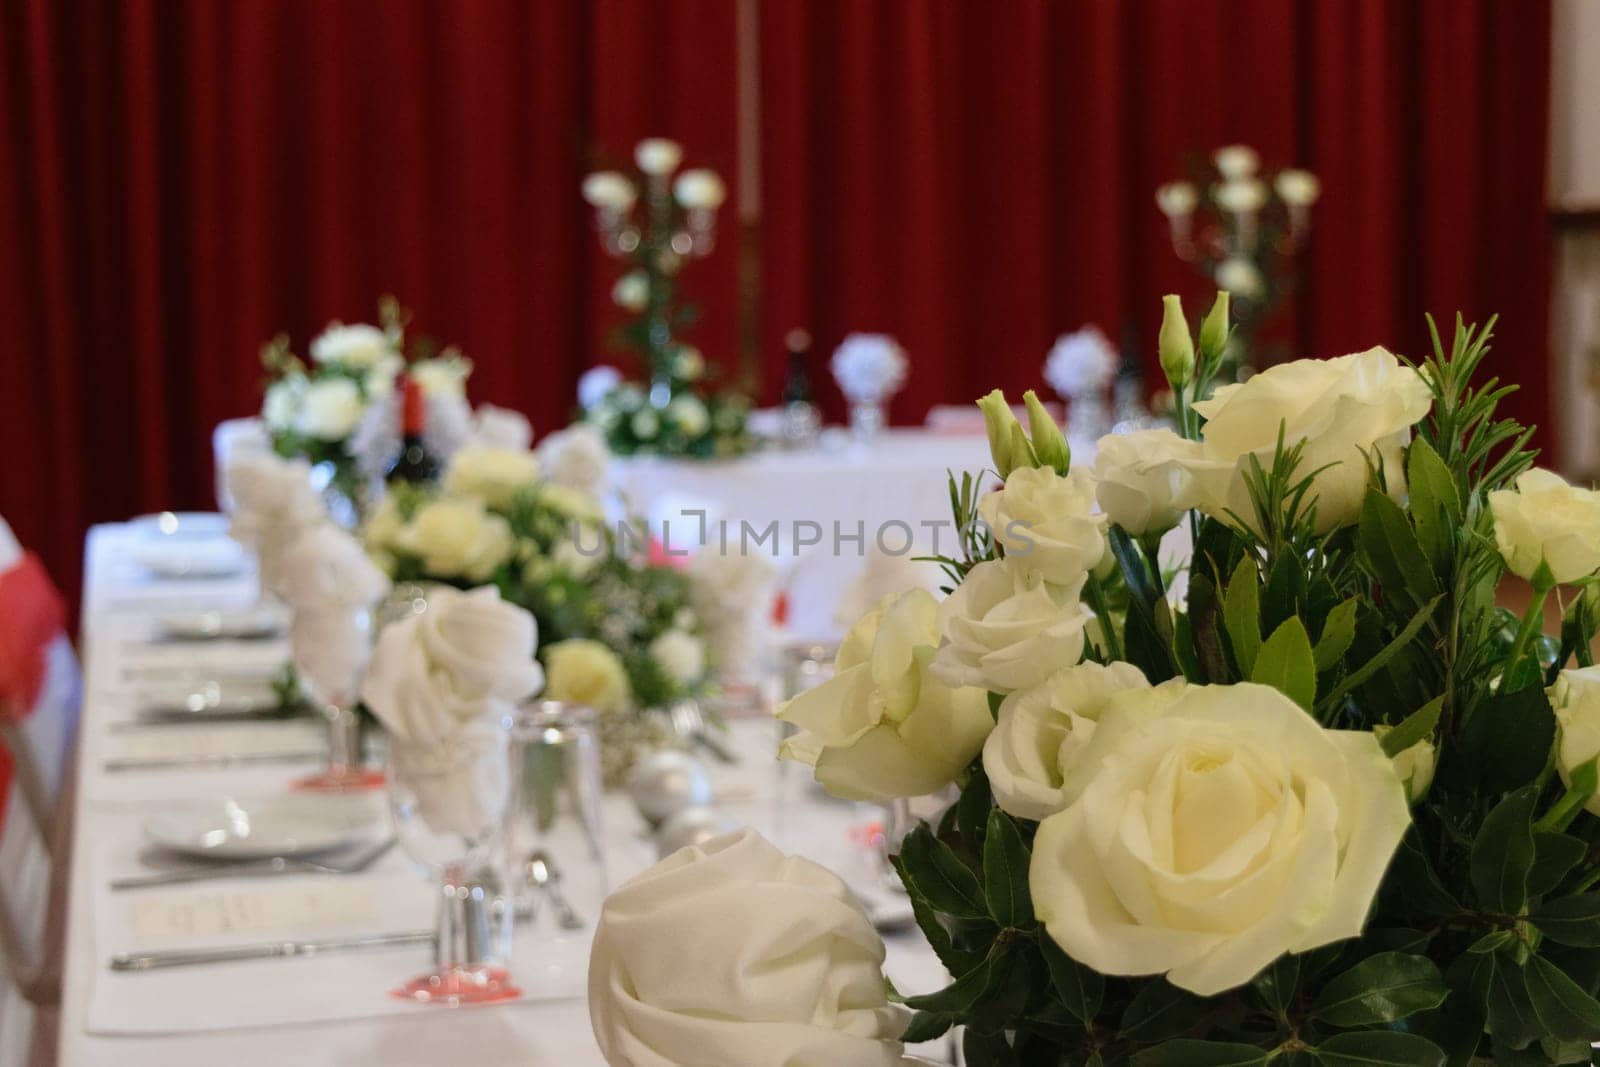 A beautifully decorated wedding reception table with white roses and elegant table settings. The background features red curtains and additional floral arrangements.